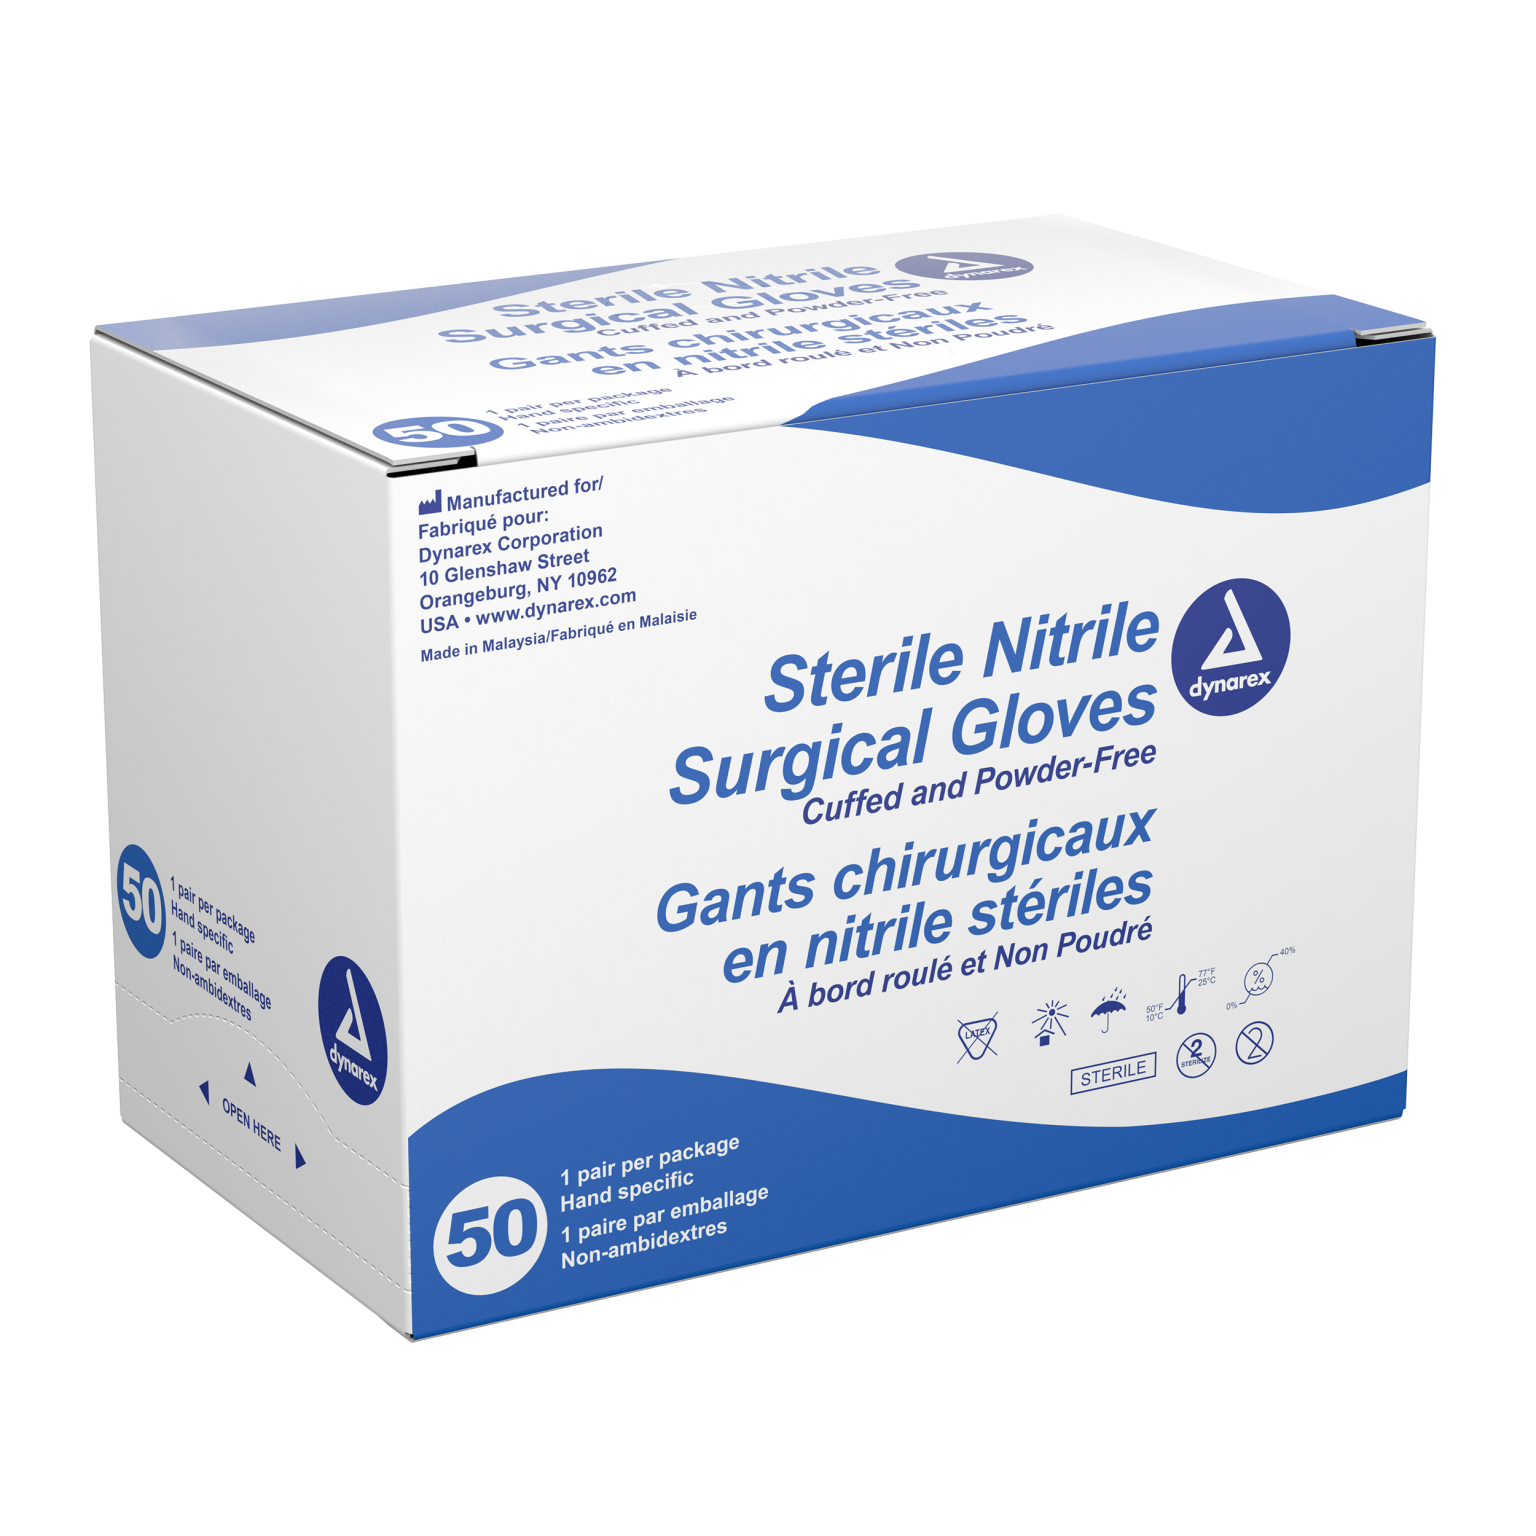 Sterile Nitrile Surgical Gloves- Powder-Free (Pairs) - Size 7.5 ...